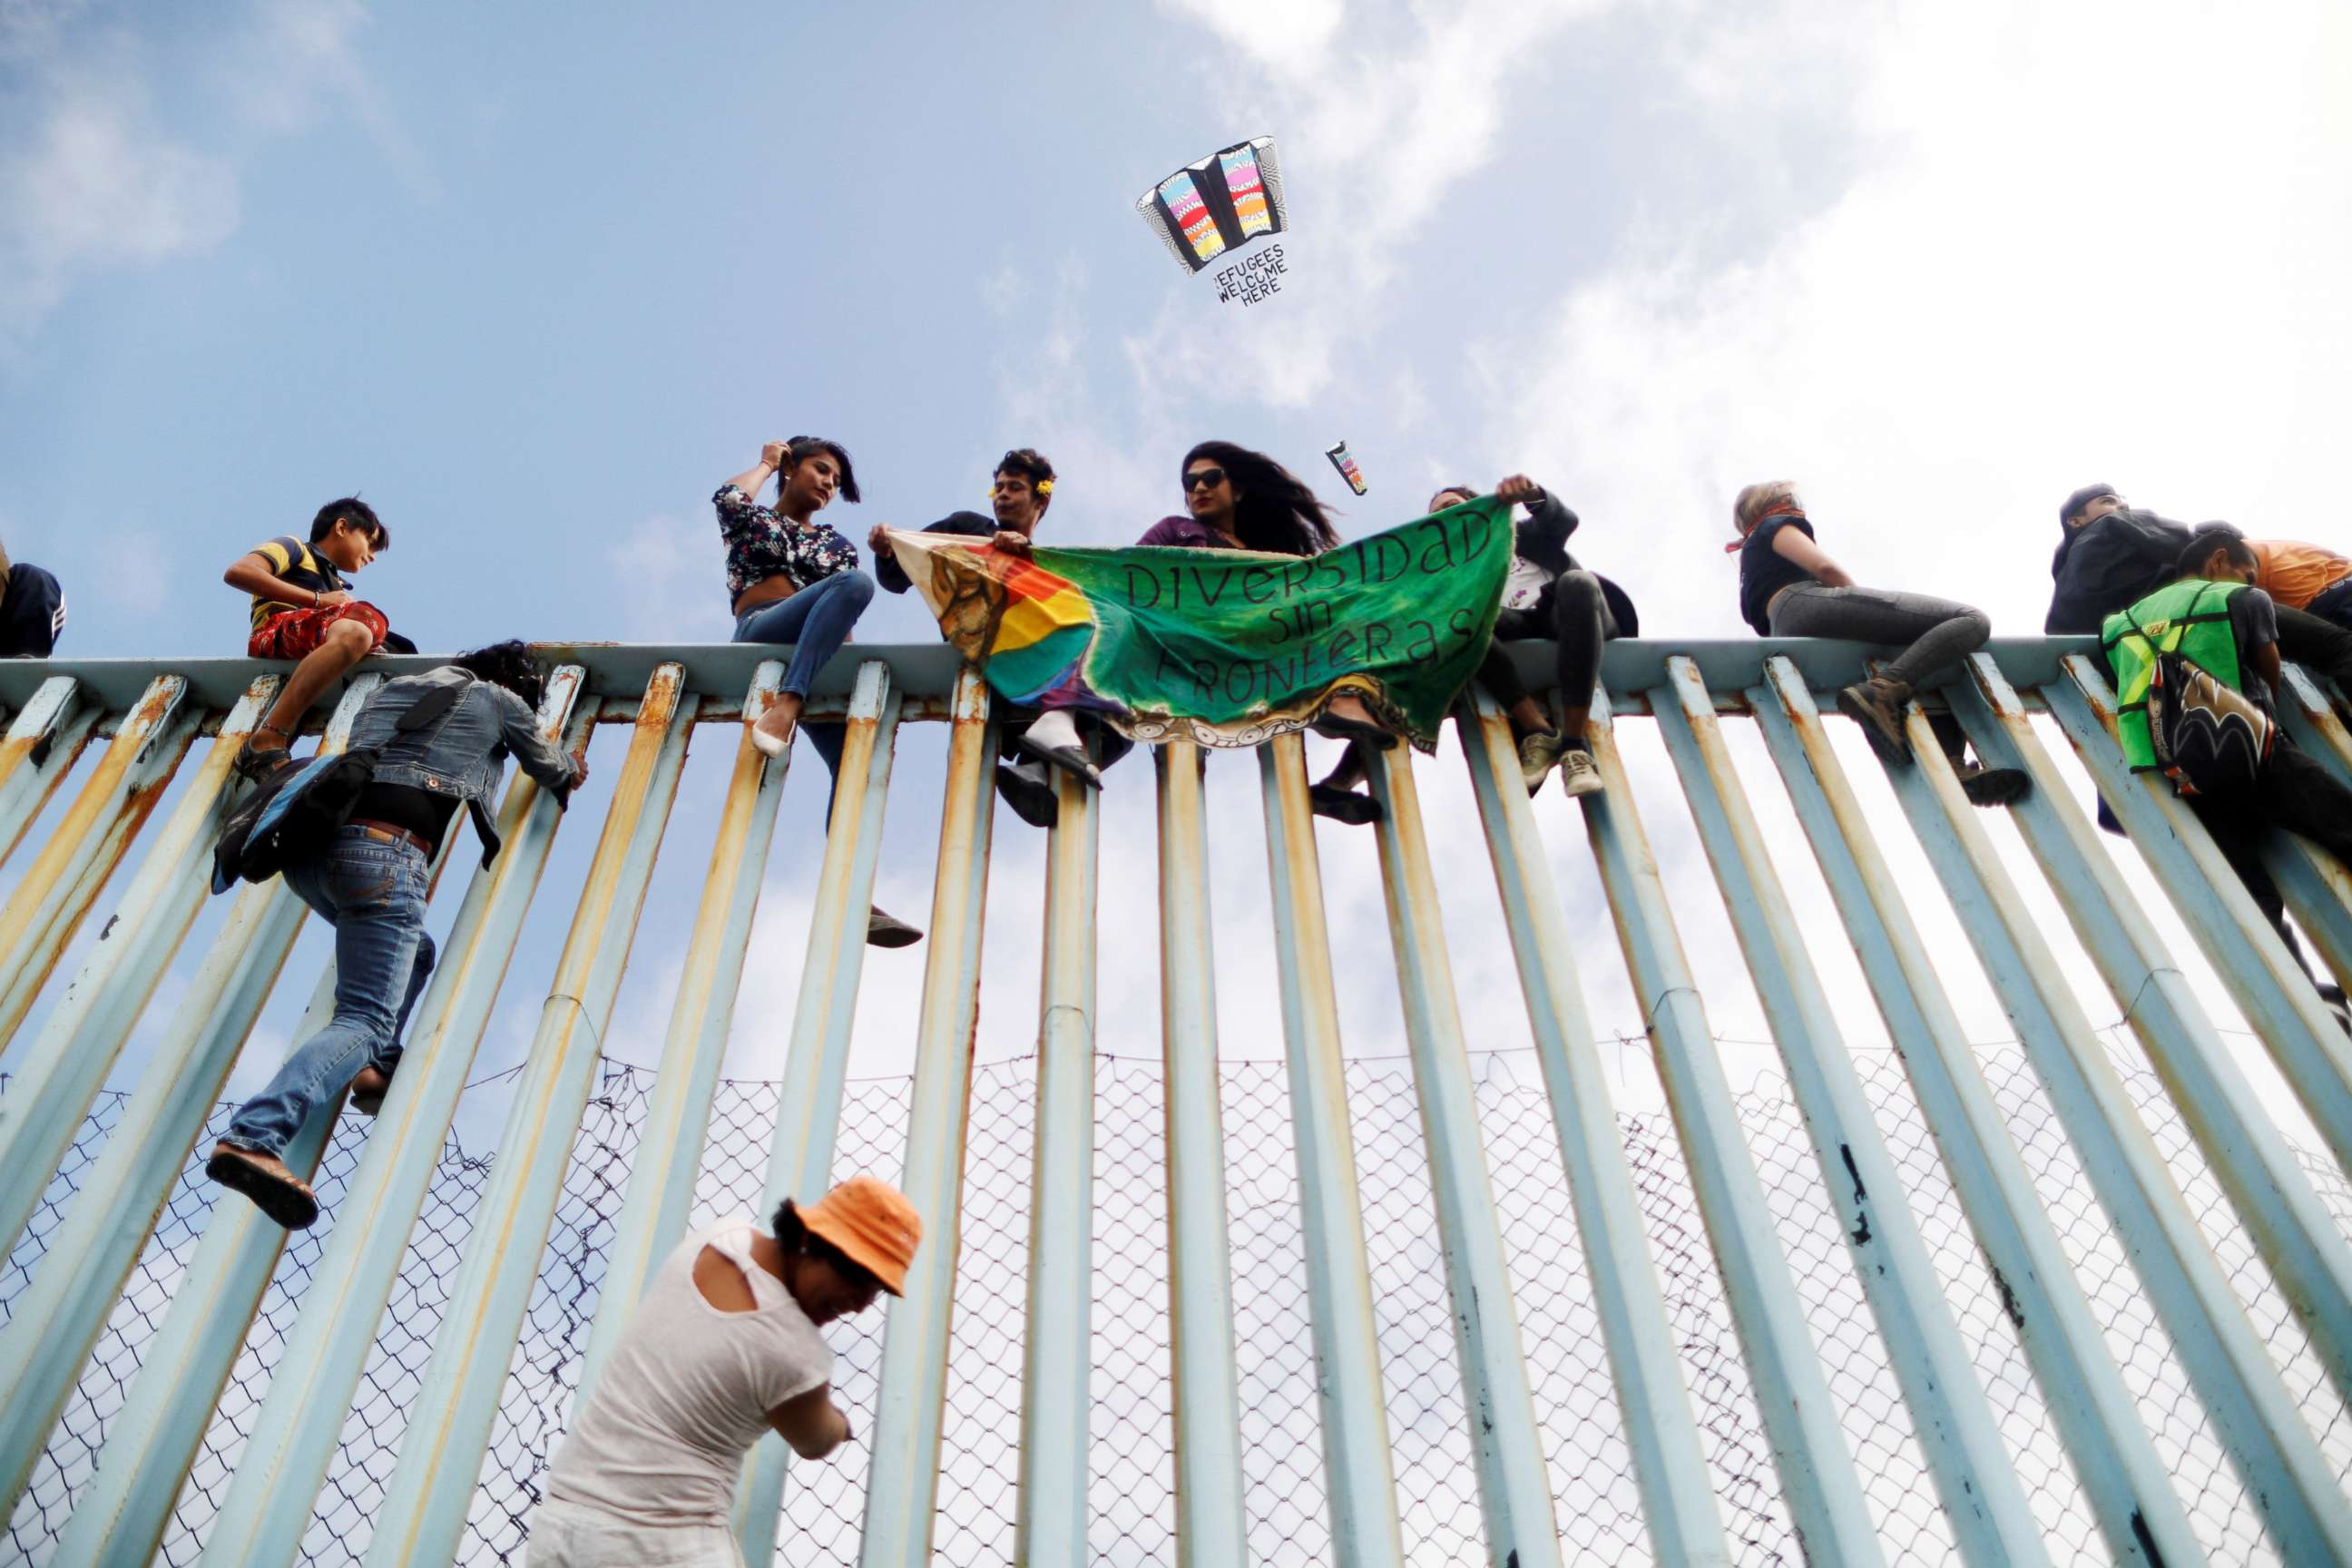 PHOTO: Members of a caravan of migrants from Central America sit on the border fence between Mexico and the U.S., as part of a demonstration prior to preparations for an asylum request in the U.S., in Tijuana, Mexico, April 29, 2018. 